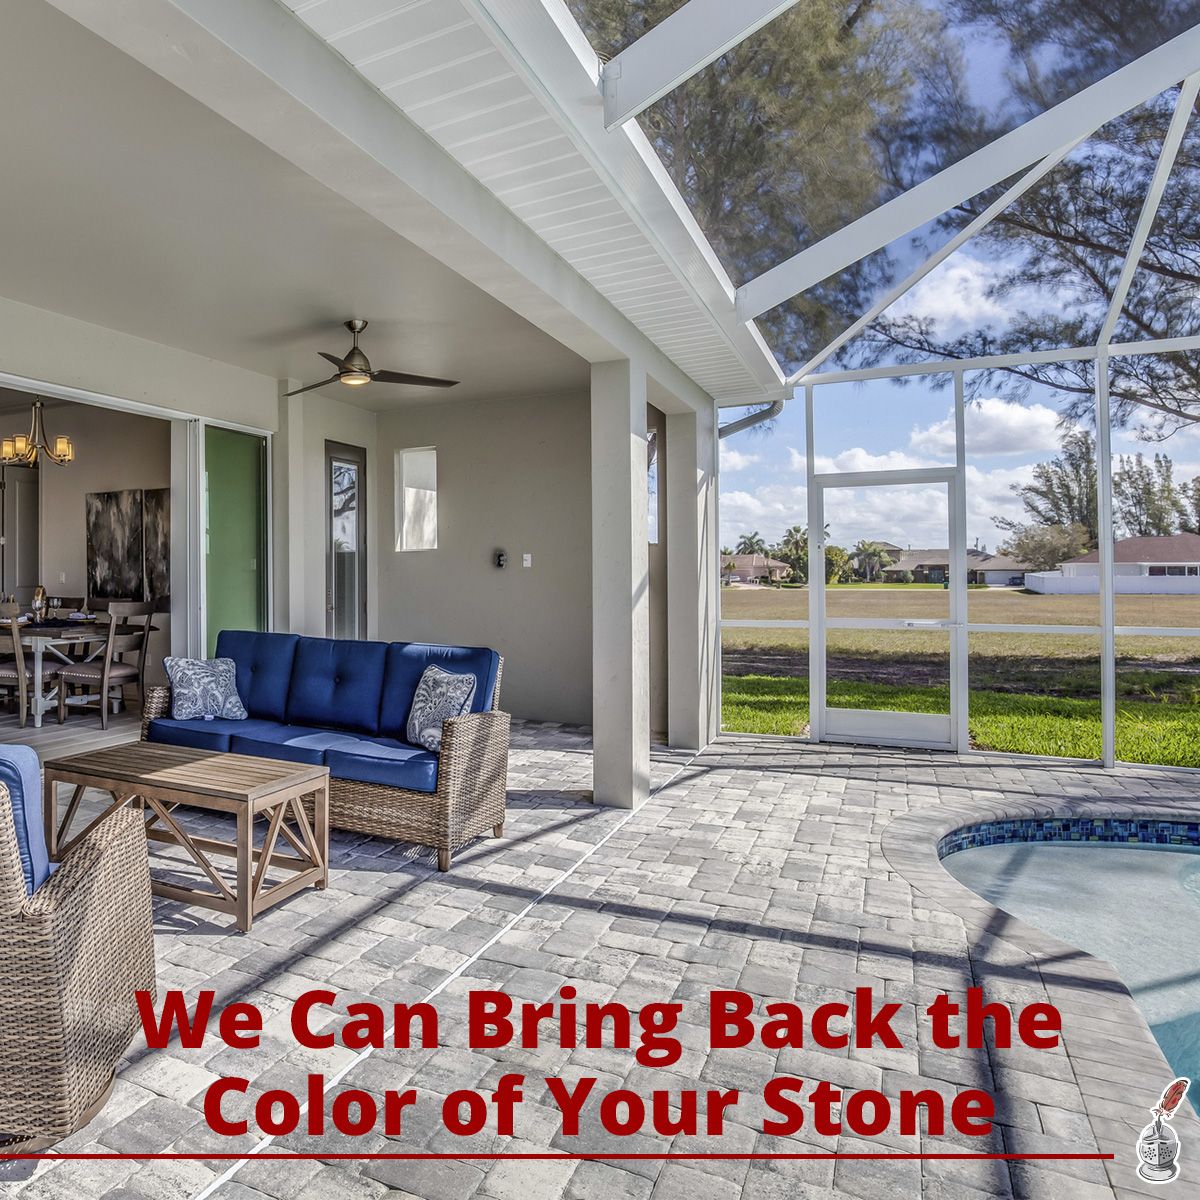 We Can Bring Back the Color of Your Stone